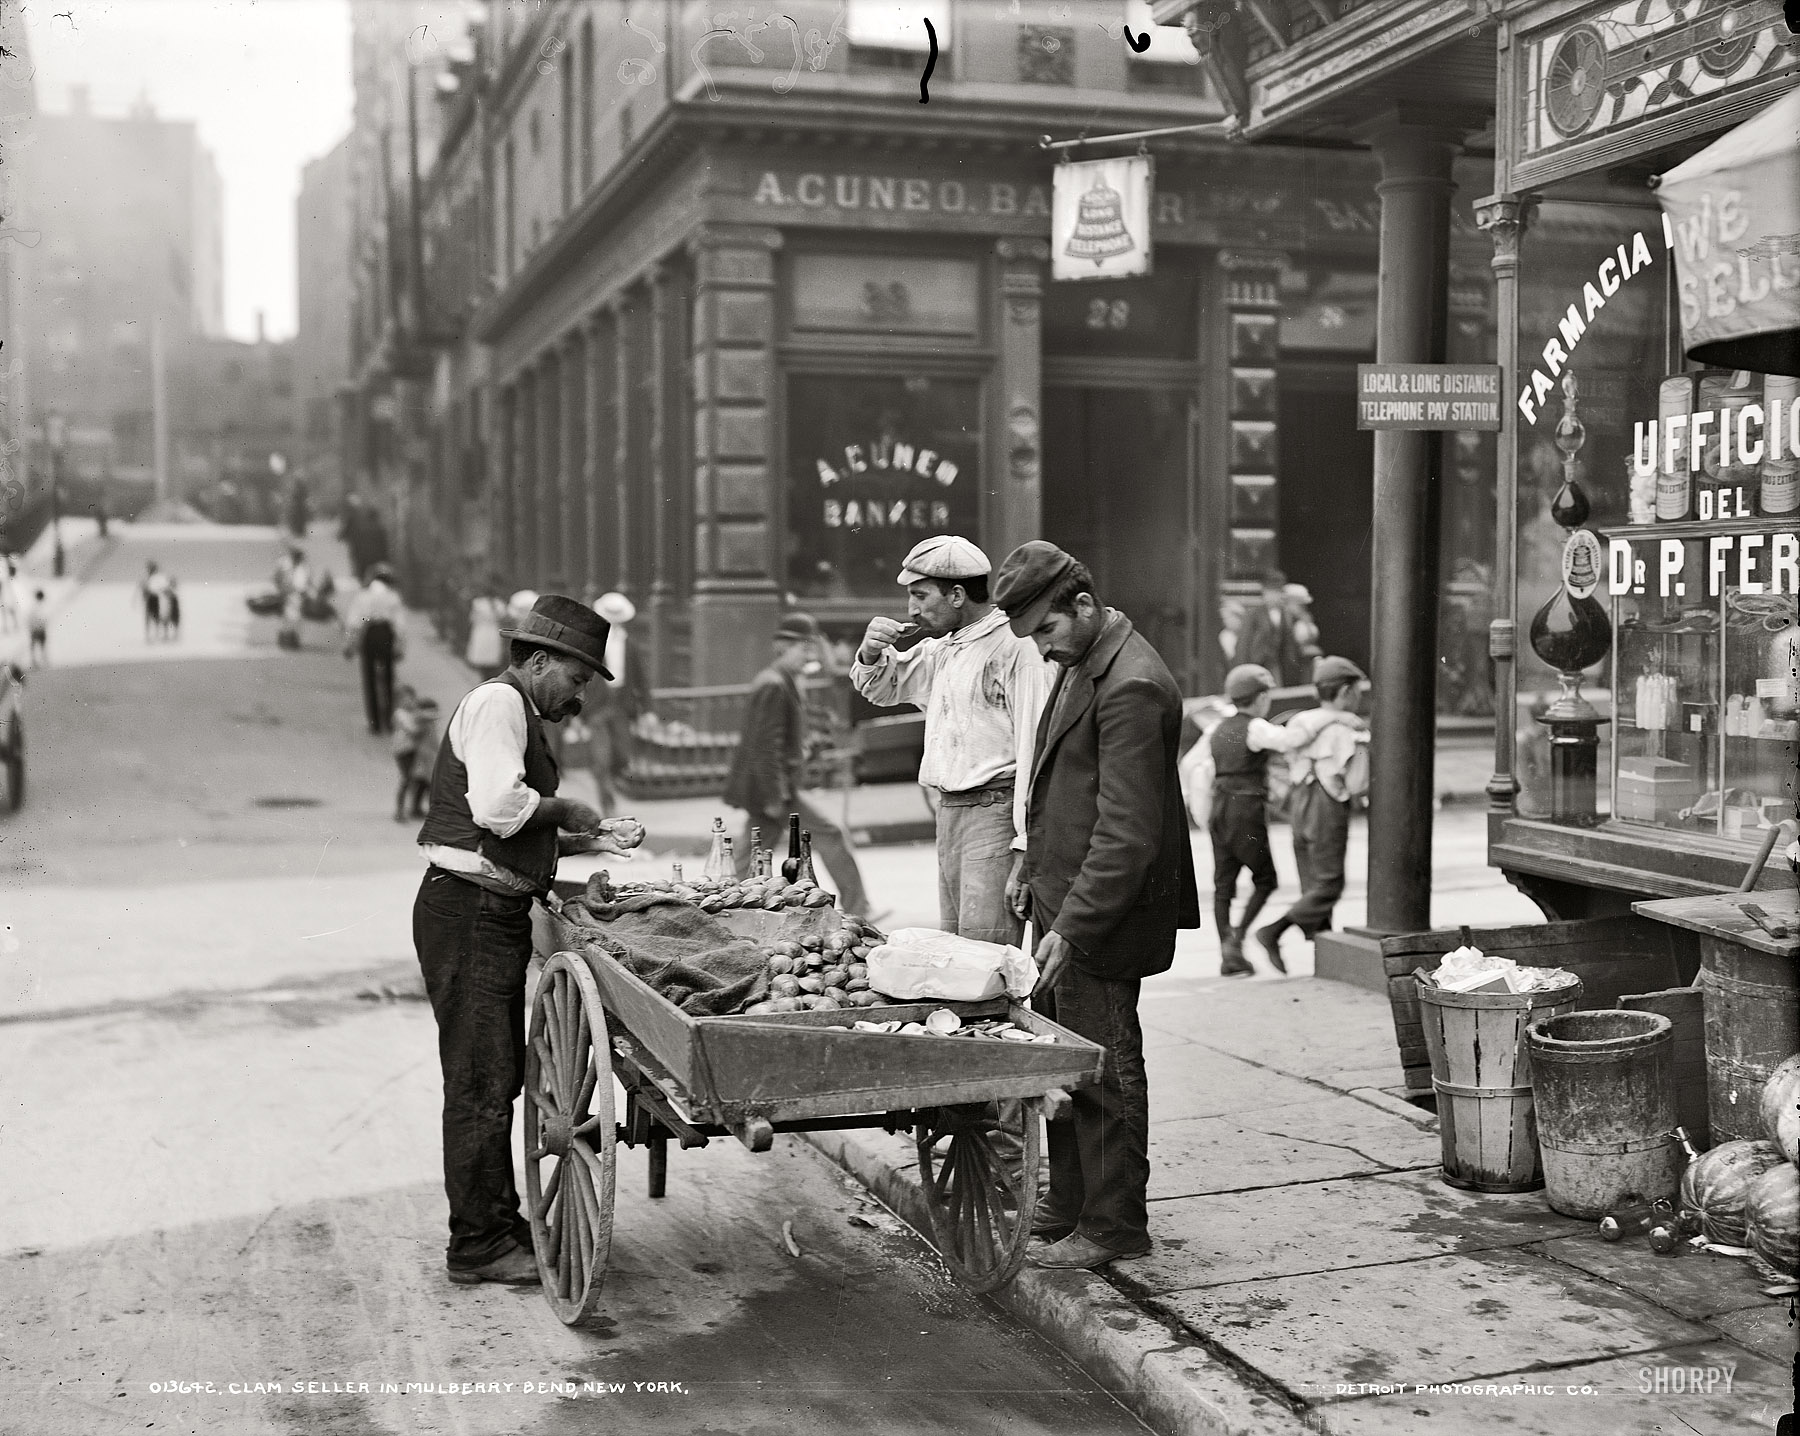 New York City circa 1900-1906. "Clam seller in Mulberry Bend." Detroit Publishing Company glass negative. View full size.